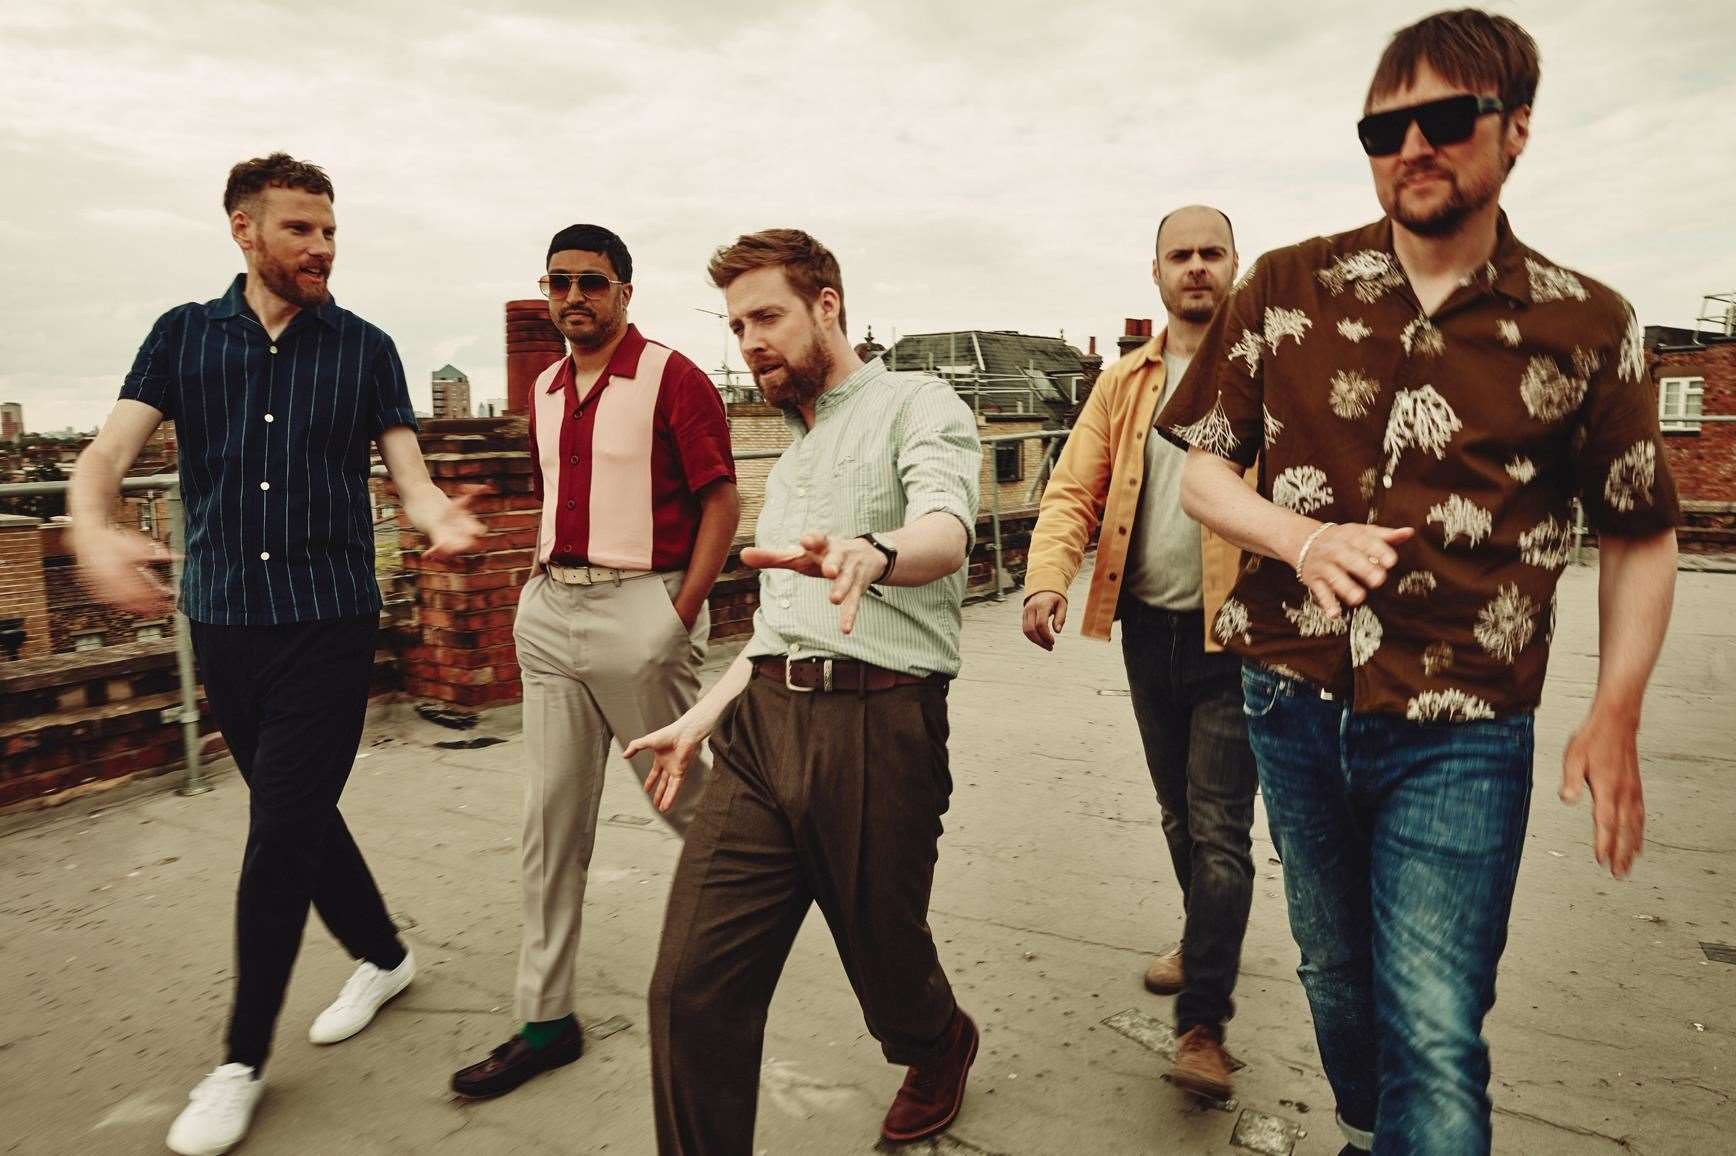 Kaiser Chiefs are among the line-up for the event at Eridge Park